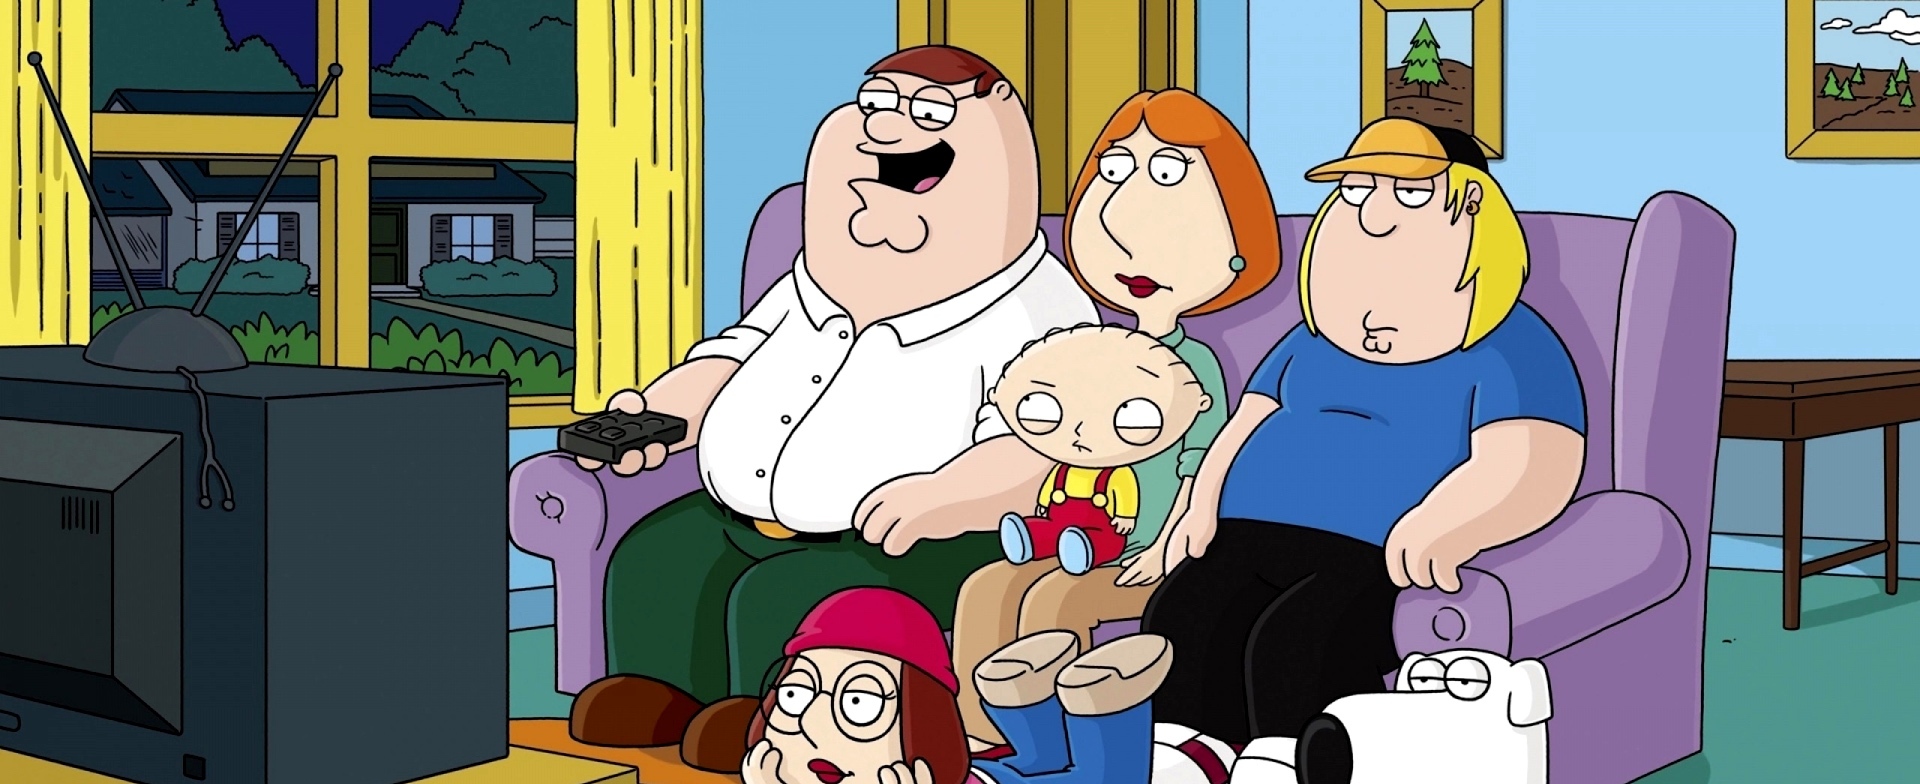 Watch Family Guy tv series streaming online | BetaSeries.com